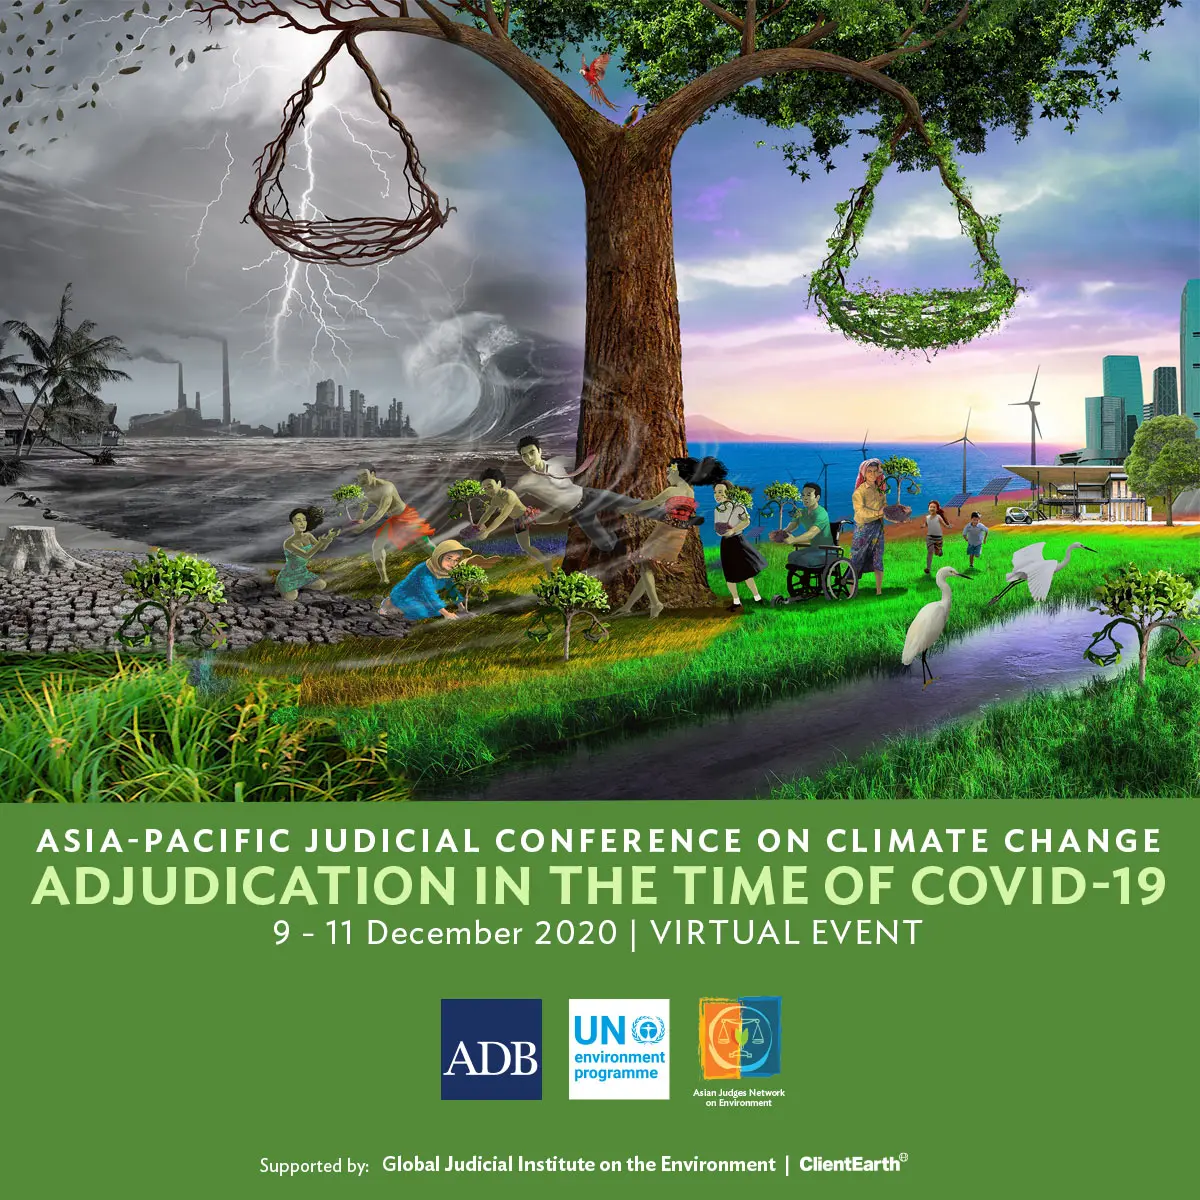 Asia-Pacific Judicial Conference on Climate Change